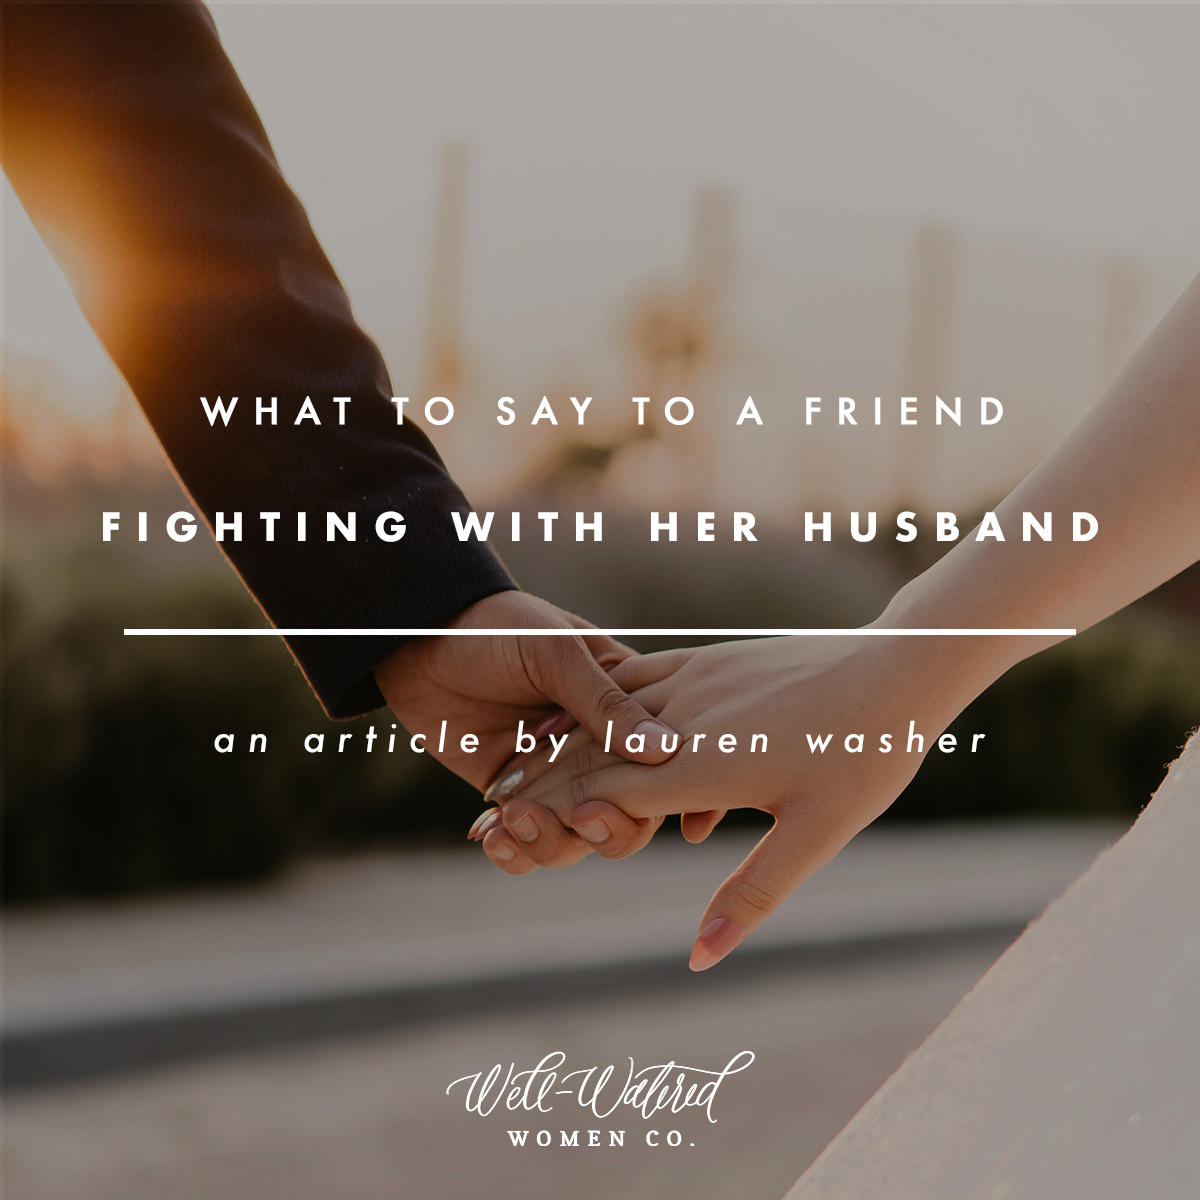 What to Say to a Friend Fighting With Her Husband | Well-Watered Women Articles